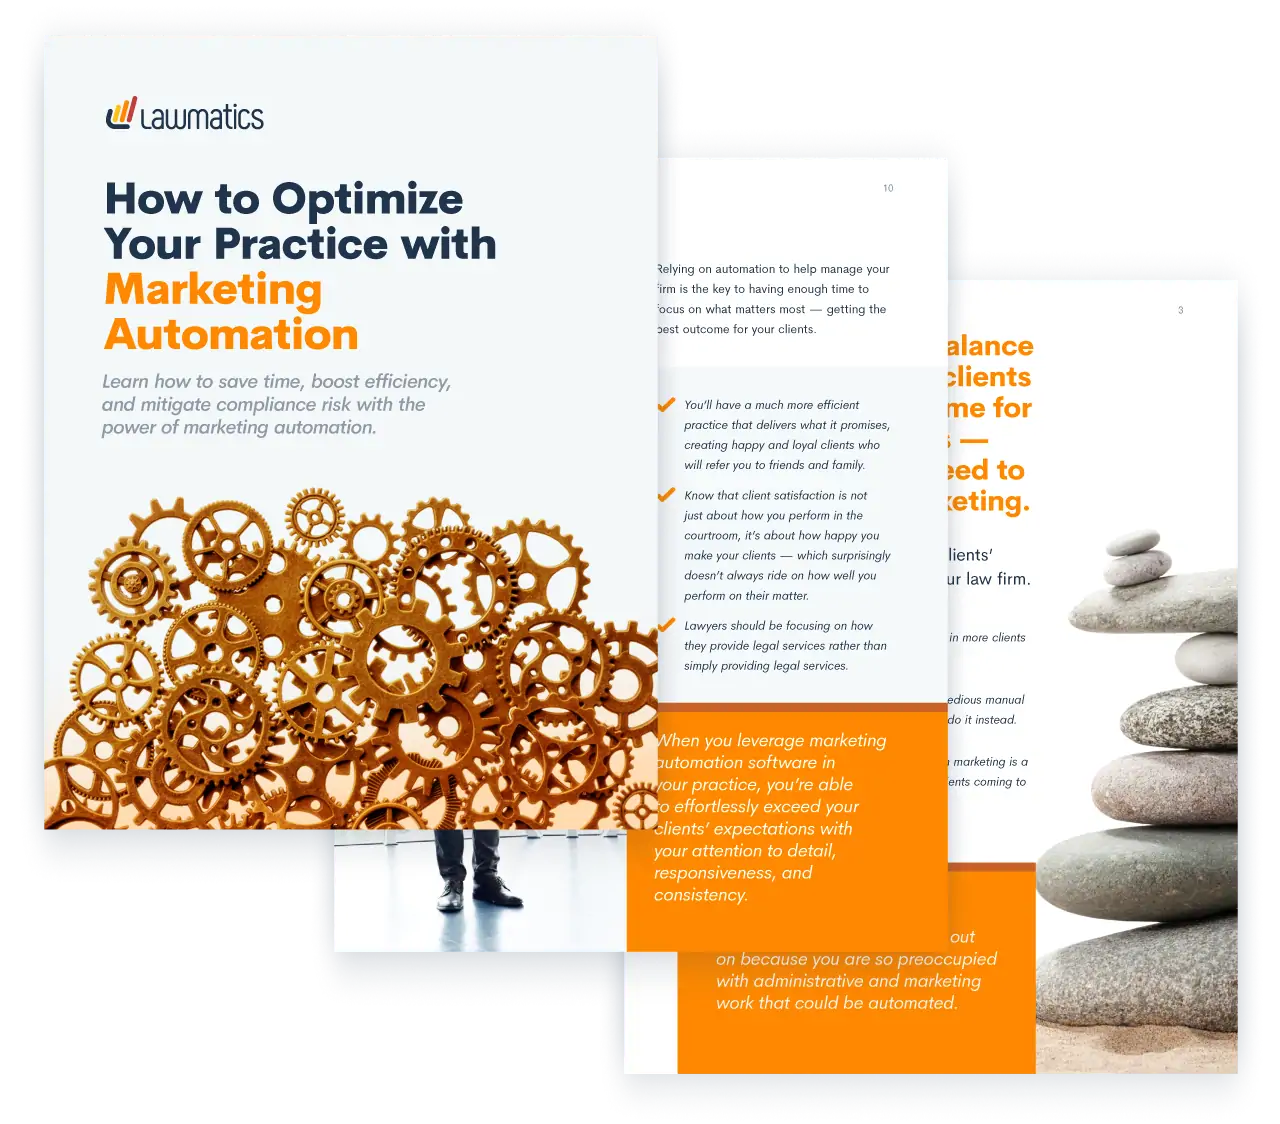 How to Optimize Your Practice with Marketing Automation